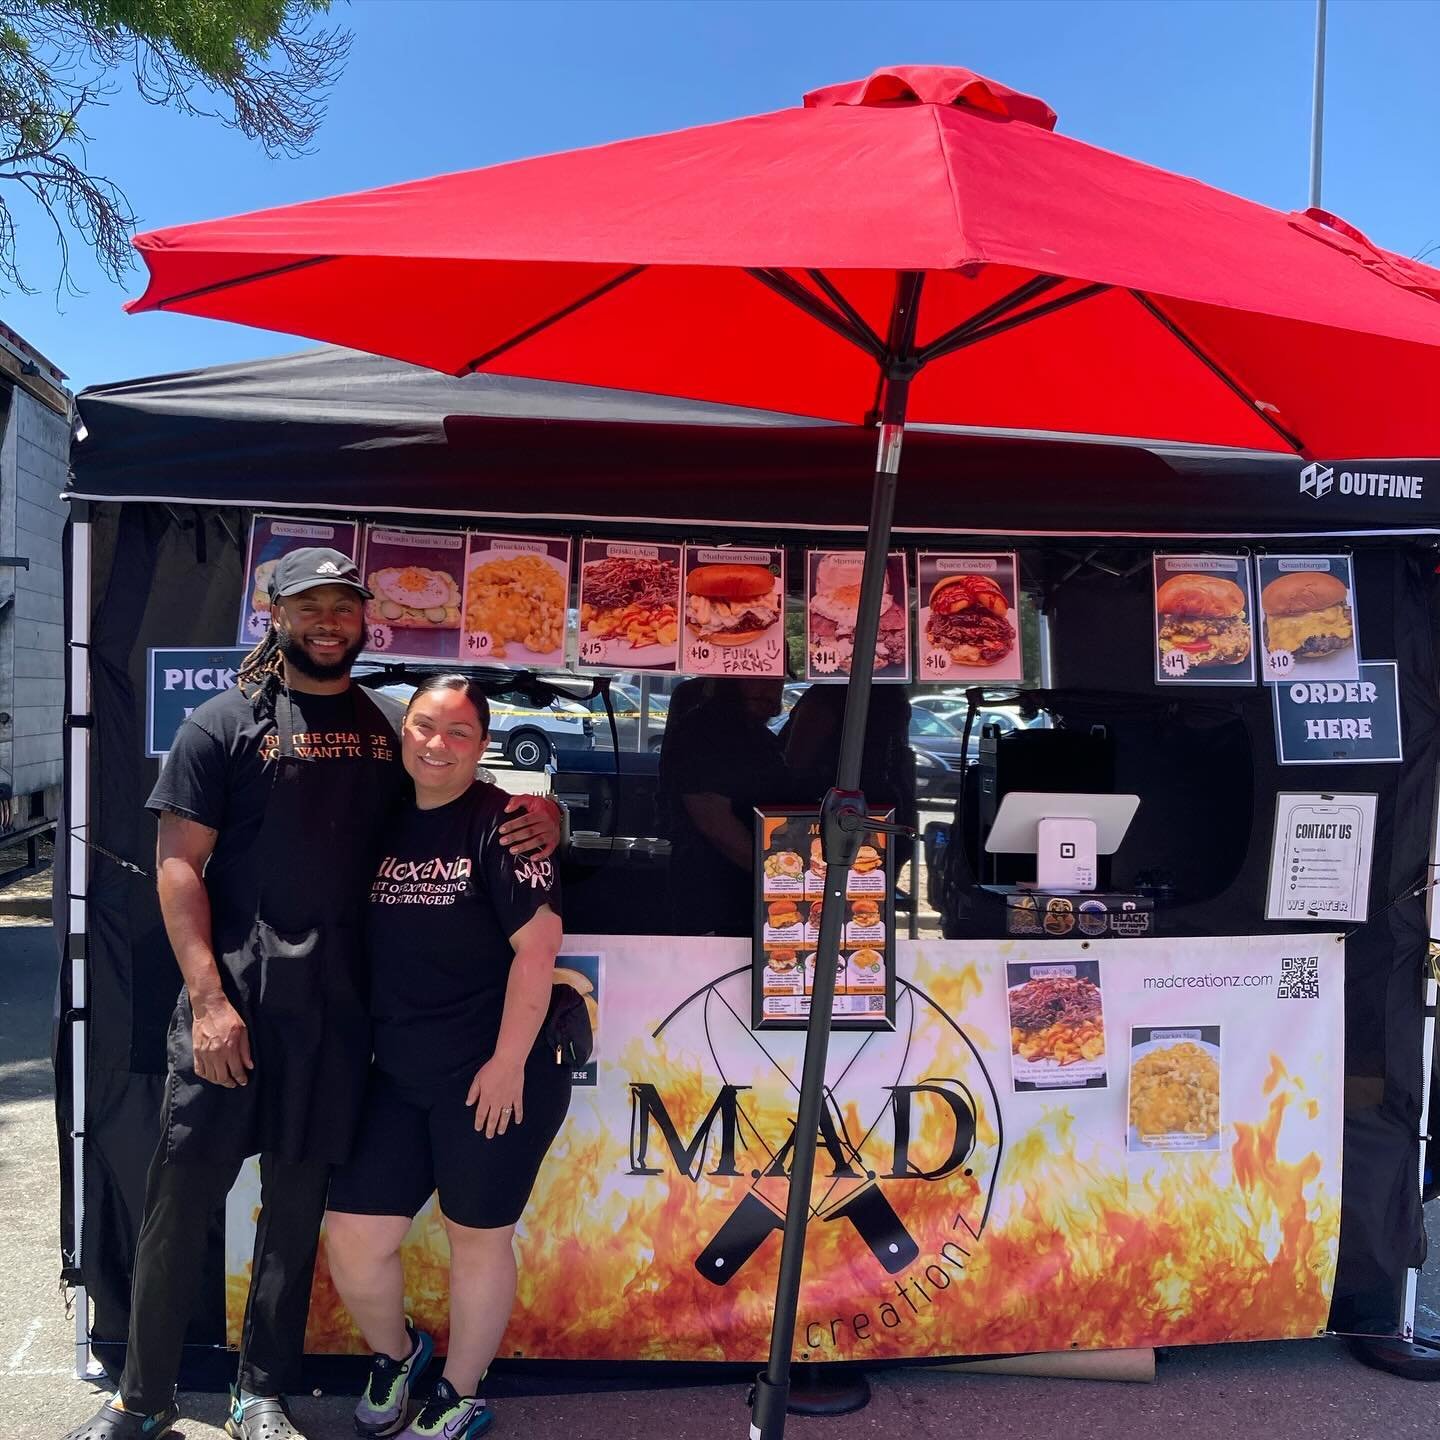 IYKYK ‼️ MAD Creationz just started at the Newark Farmers Market and they are MAD delicious 😋 Menu includes smash burgers and brisket mac n cheese. See you all there, Sundays 9-1!